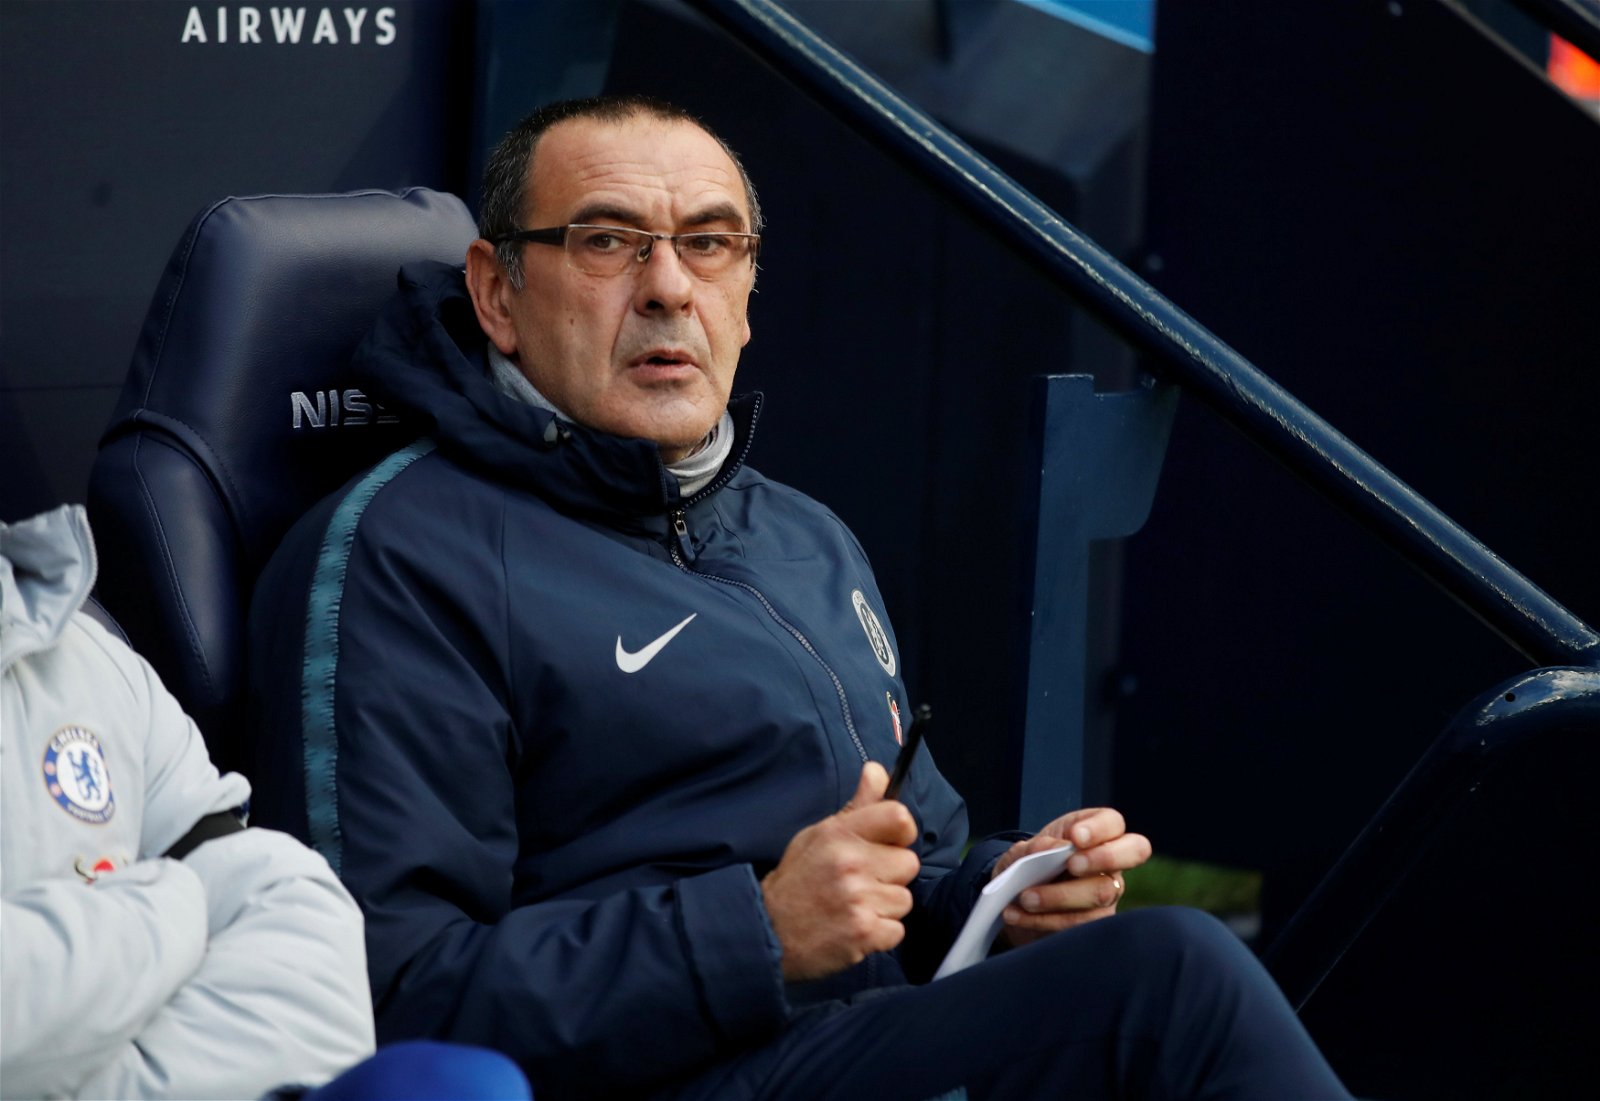 Sarri Must Bring In These Two Players To Turn Things Around: Marcotti